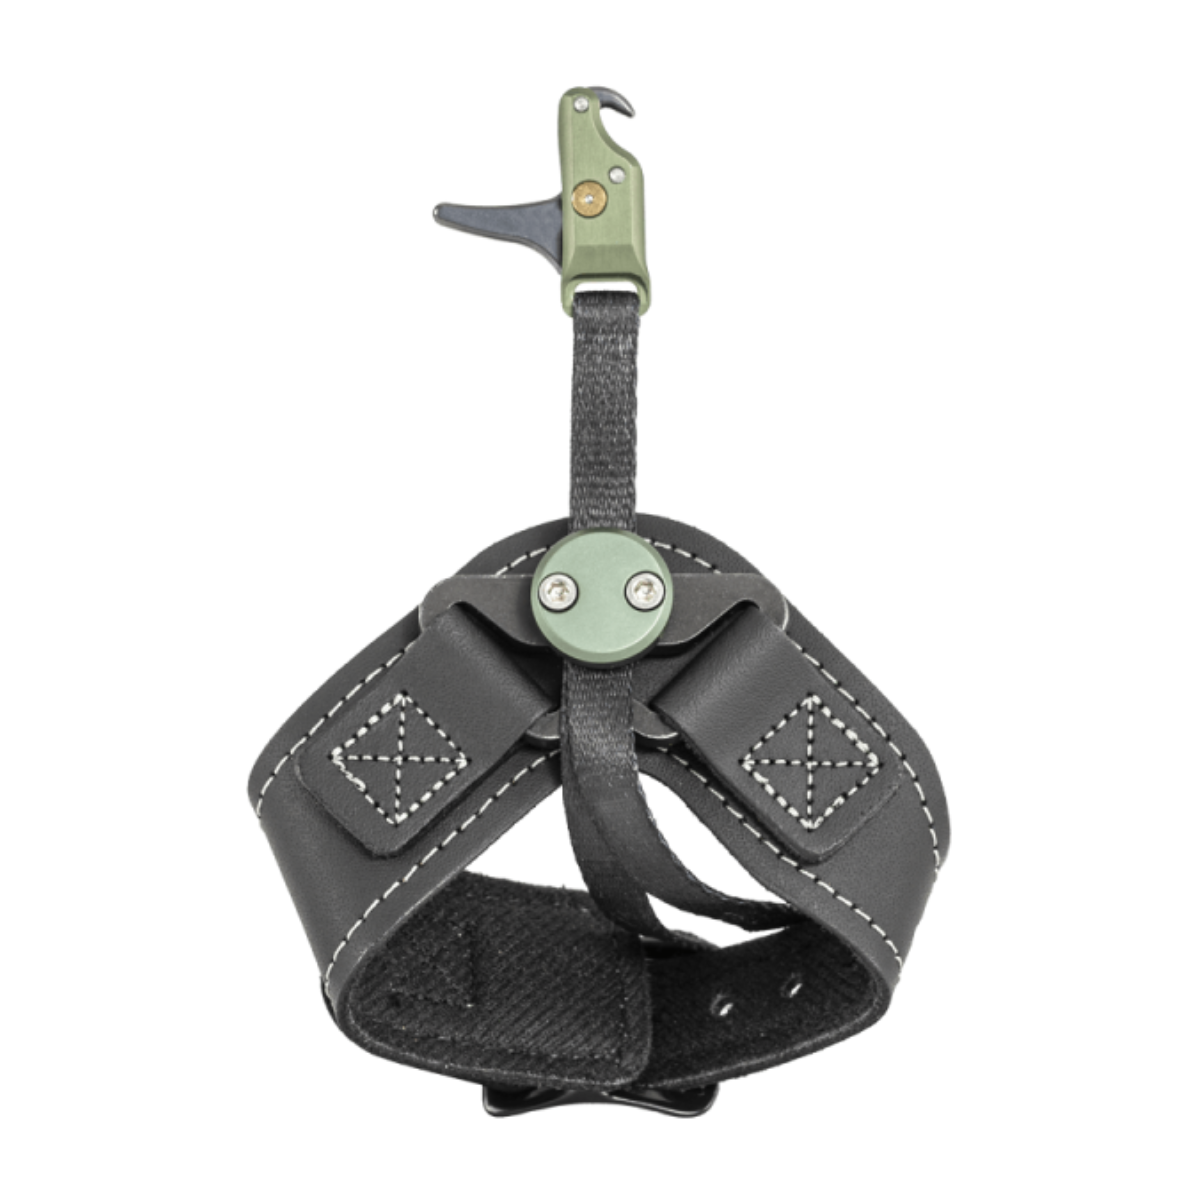 Stan SoleX WebConnect with Buckle Strap Release